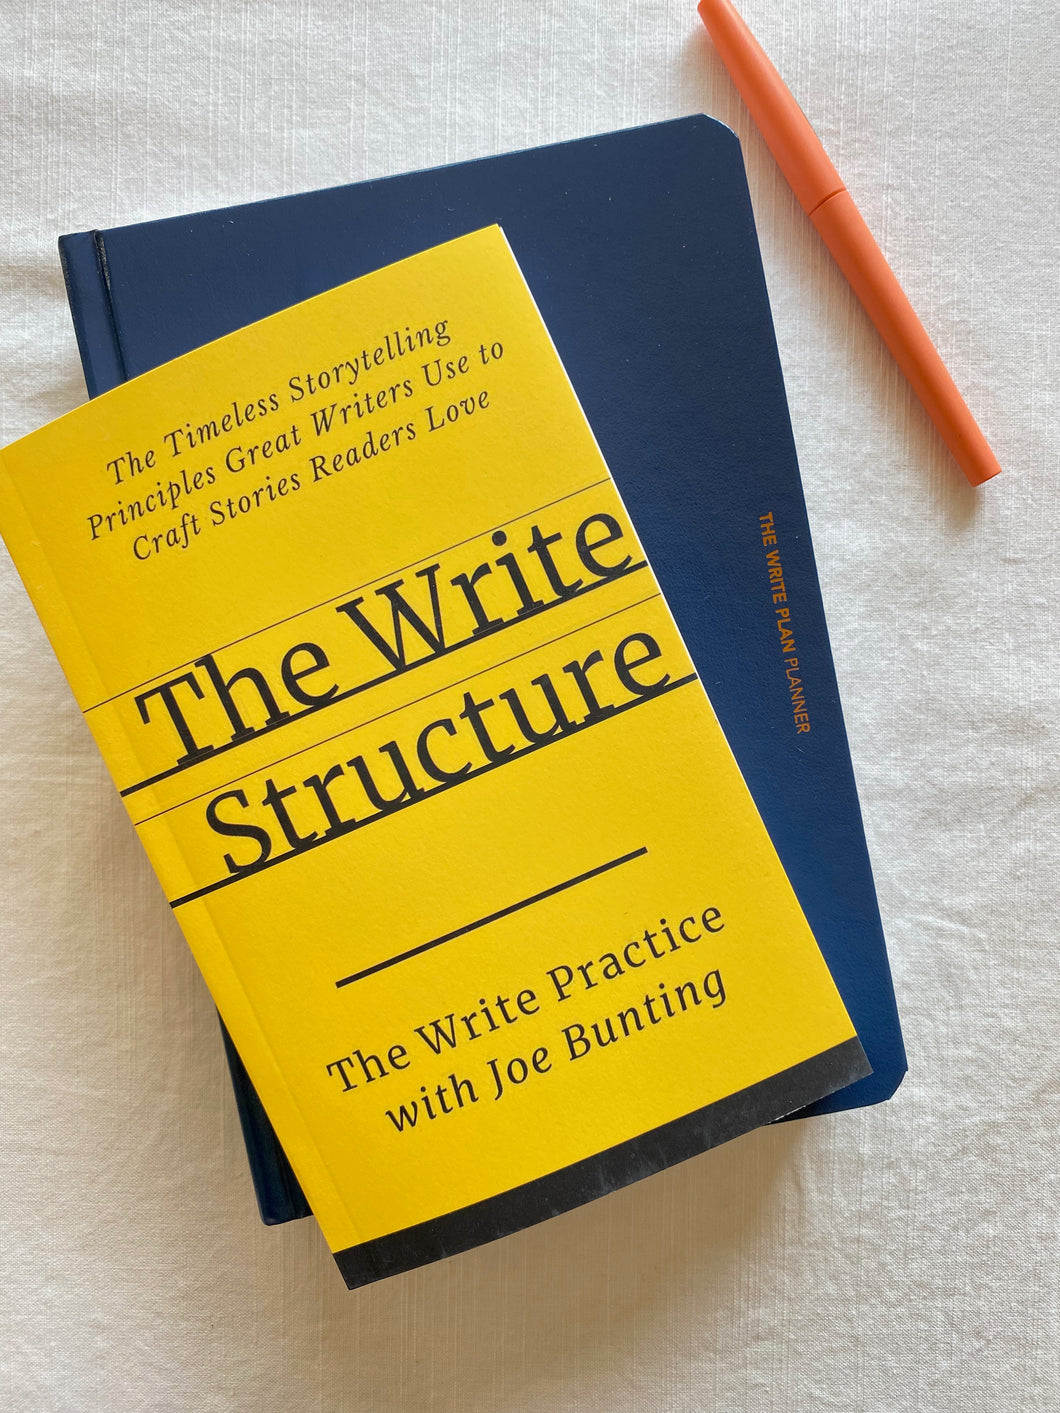 Now Write!: Fiction Writing Exercises from Today's Best Writers